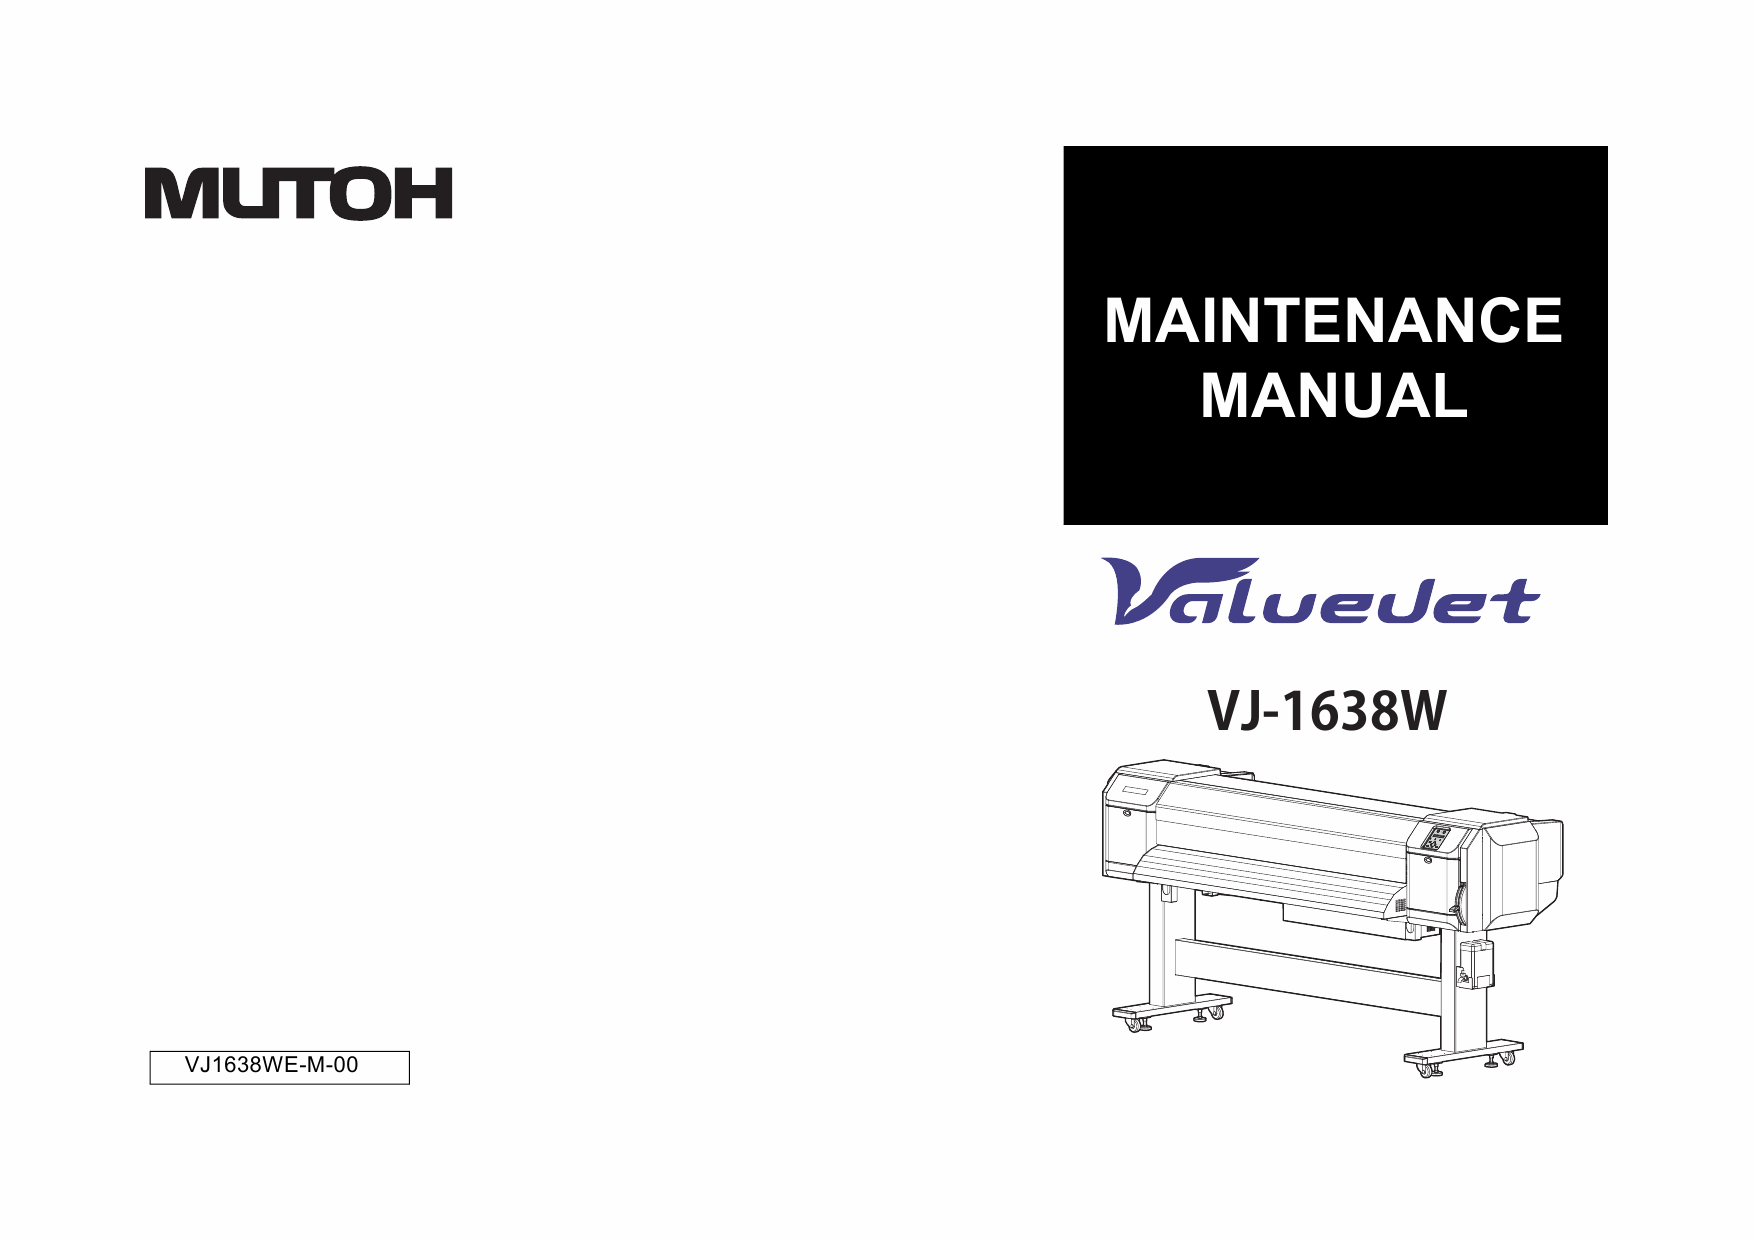 MUTOH ValueJet VJ 1638W MAINTENANCE Service and Parts Manual-1